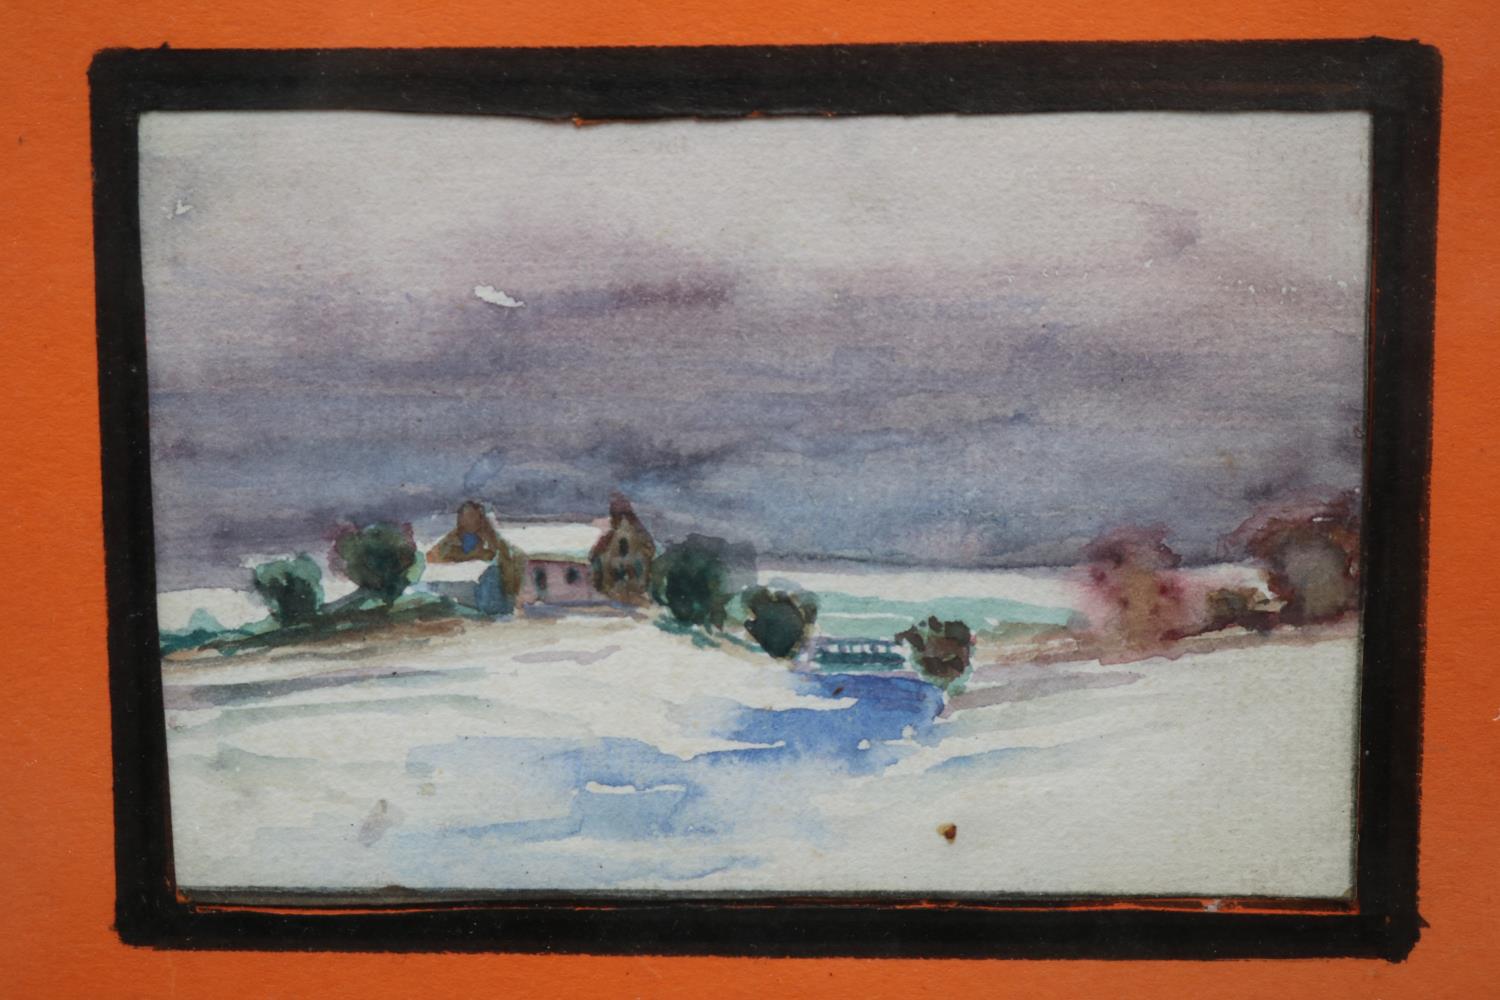 Small Continental watercolour of a winter countryside scene reputedly by Adolf Hitler 1889 – 1945